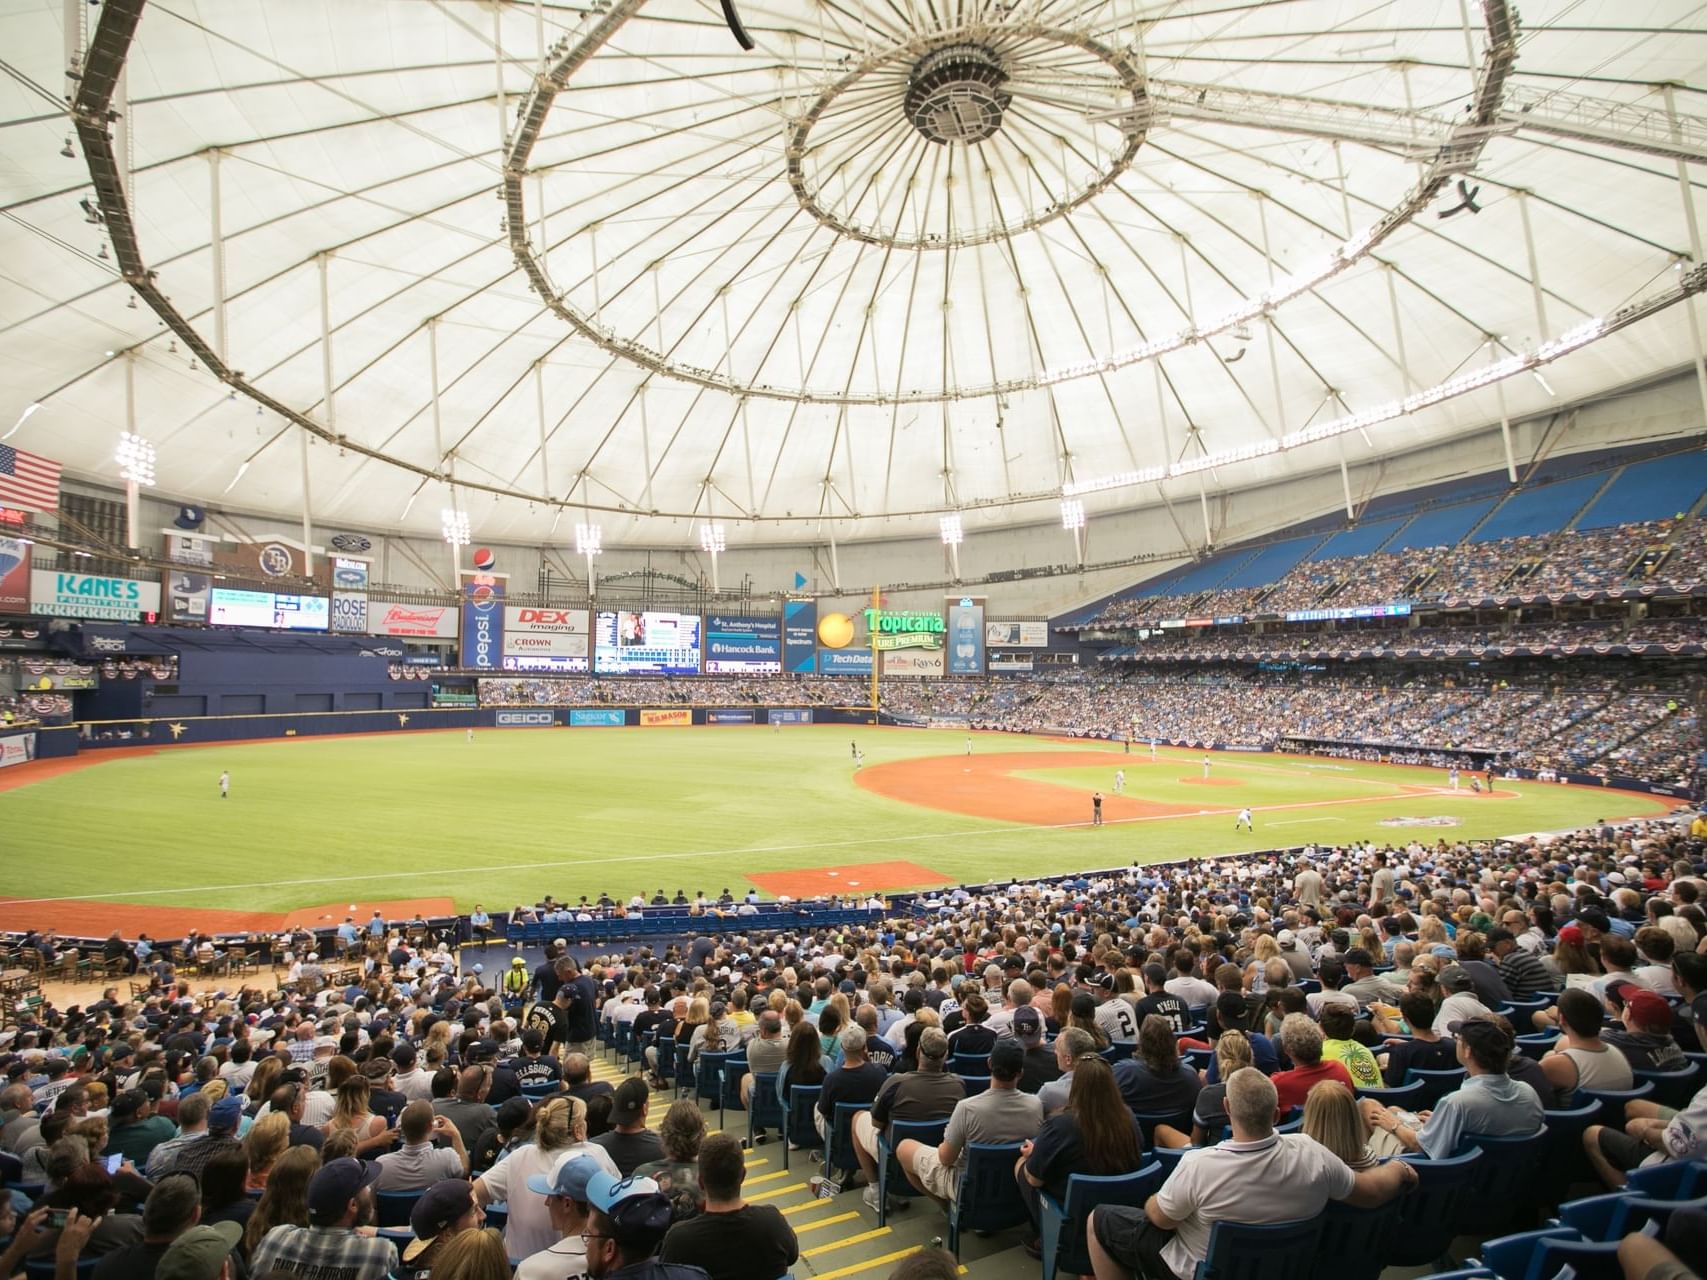 Tropicana Field filled with the crowd near The Exchange Hotel